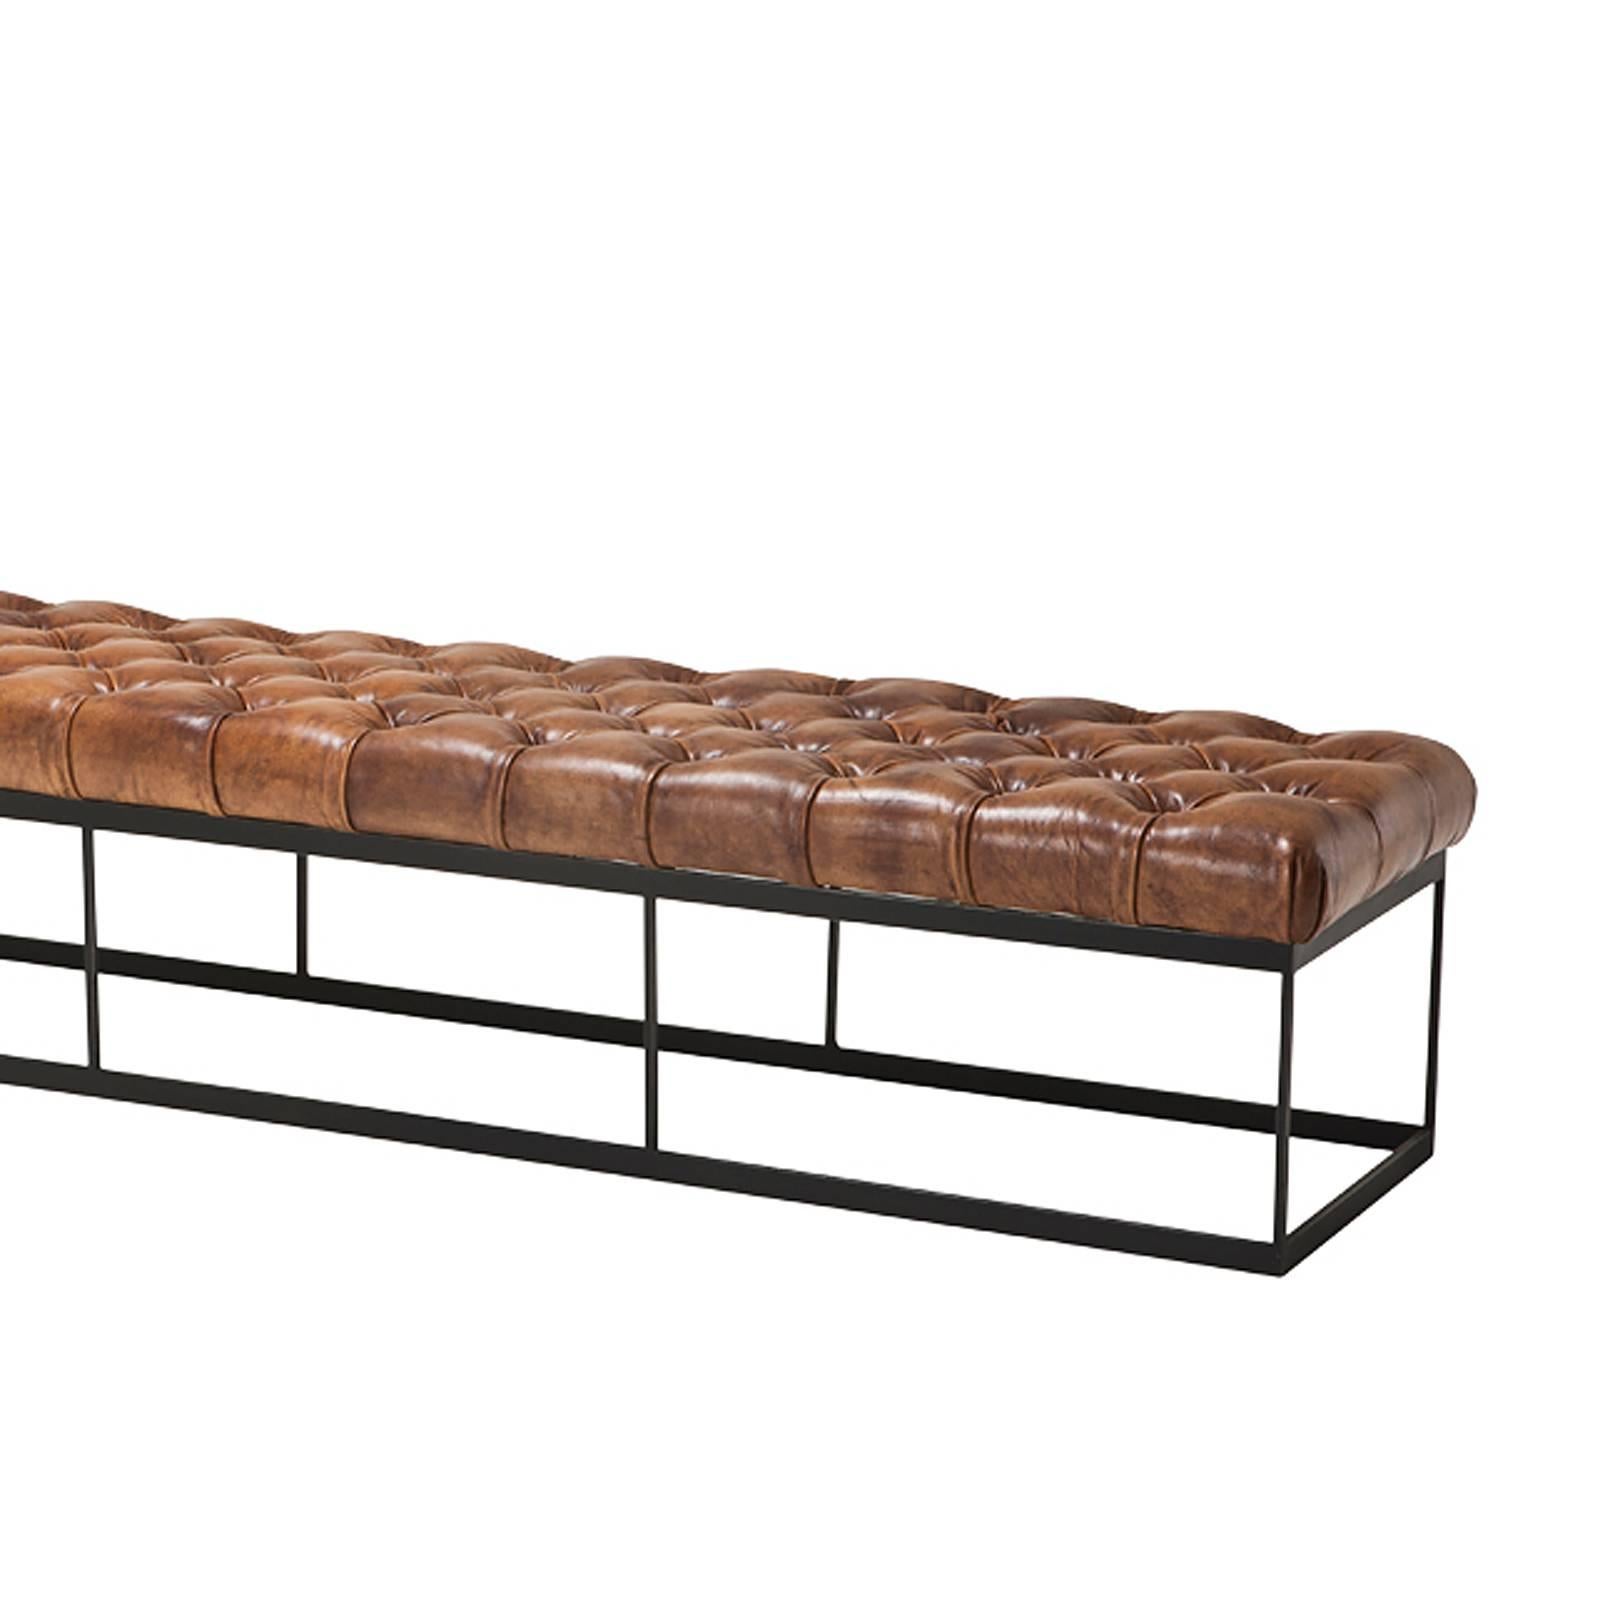 Bench Baileys with structure in zinc finish.
Seat in capitonated genuine brown leather.
   